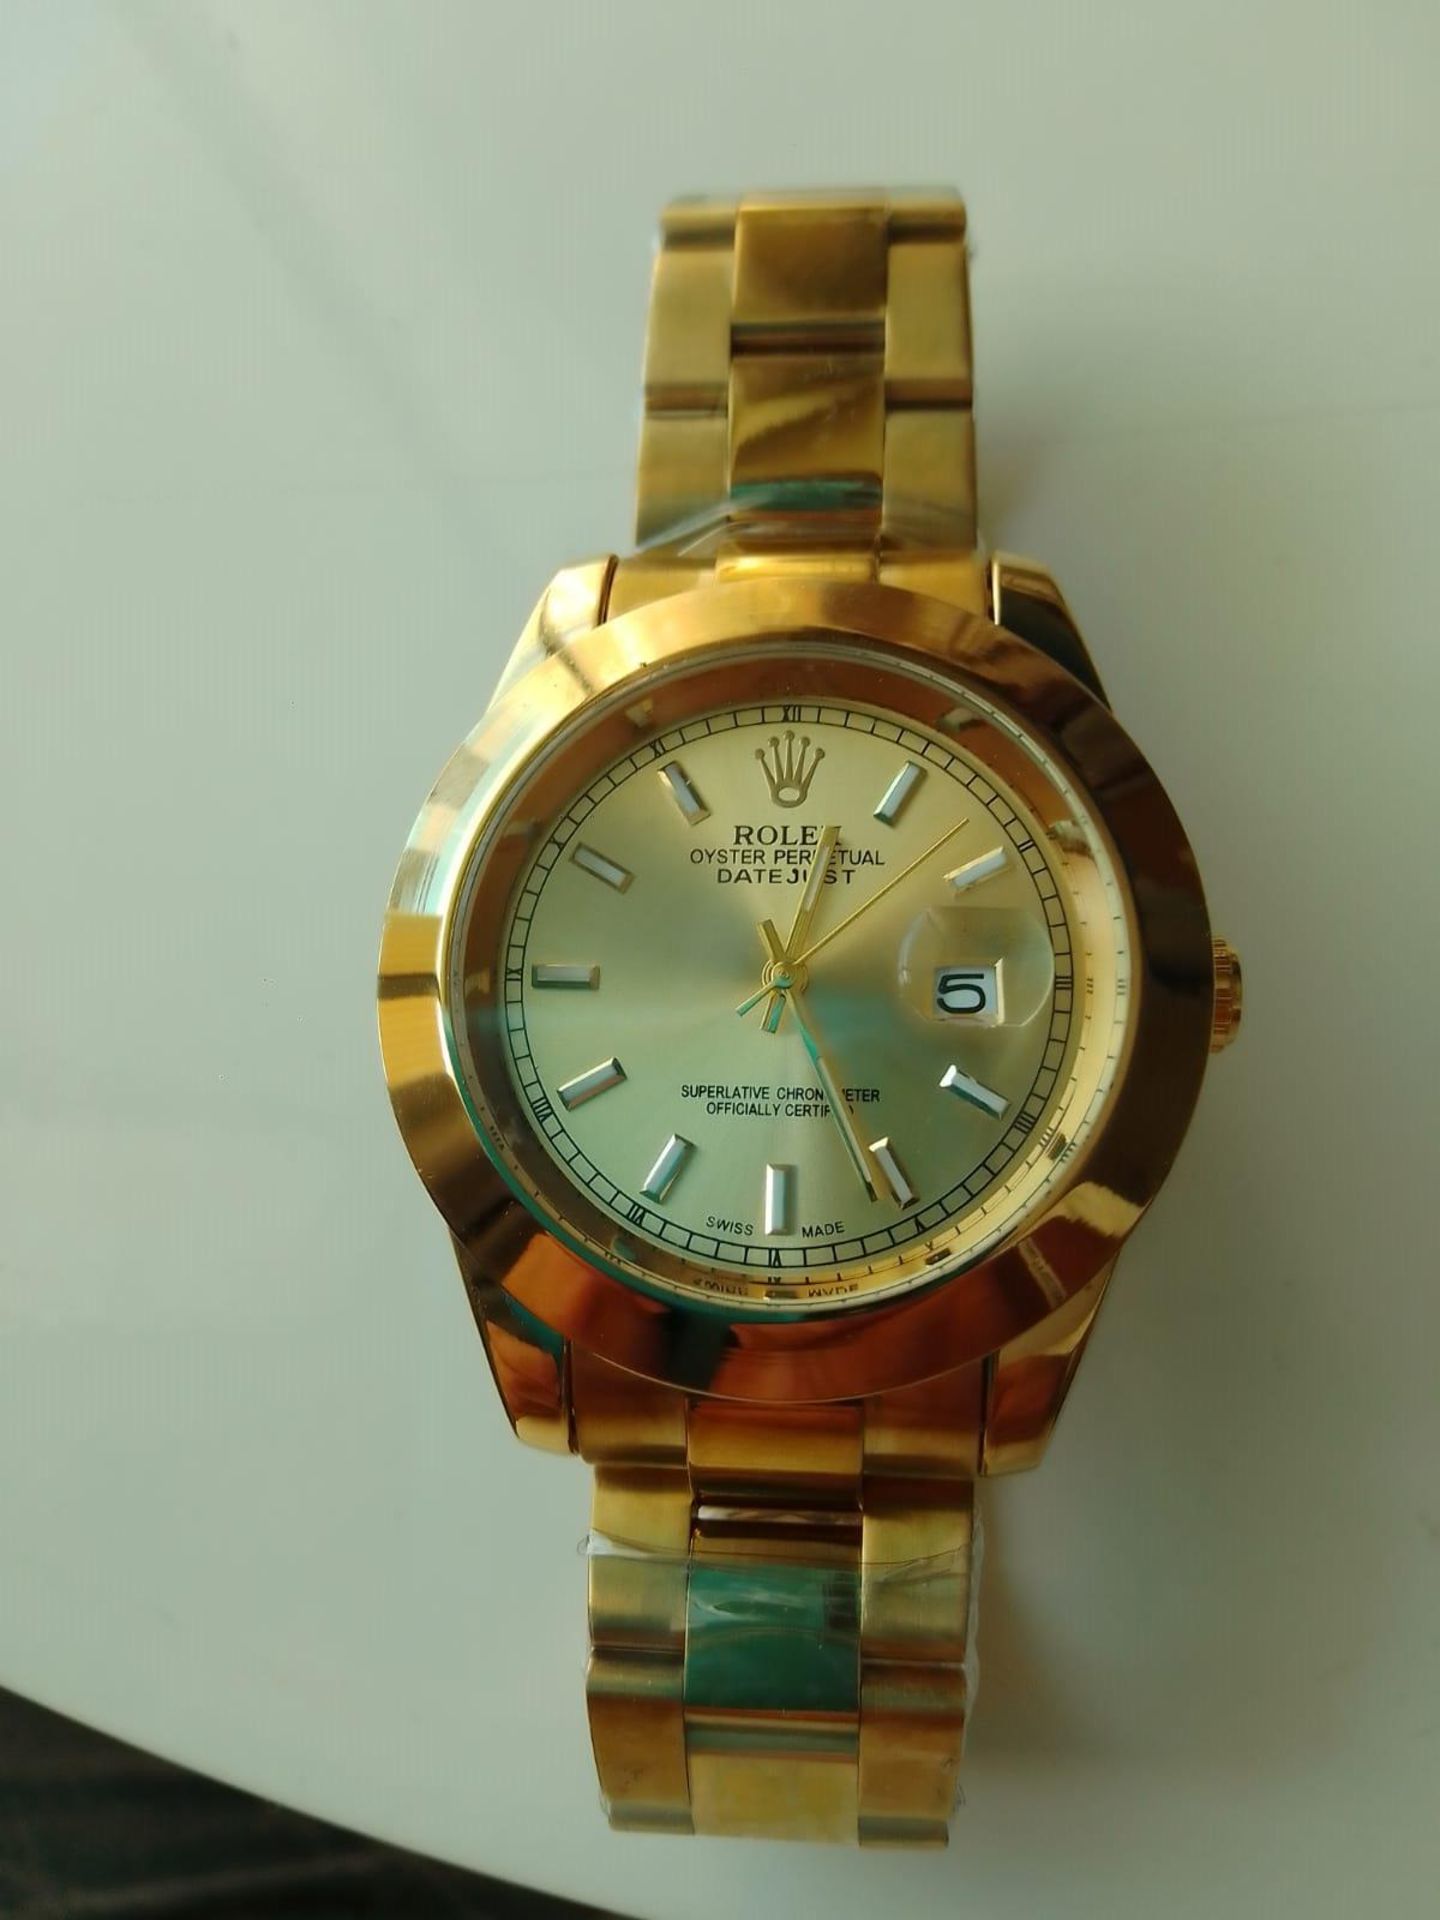 ROLEX OYSTER PERPETUAL DATE JUST WATCH, NO BOX/PAPERS *NO VAT*